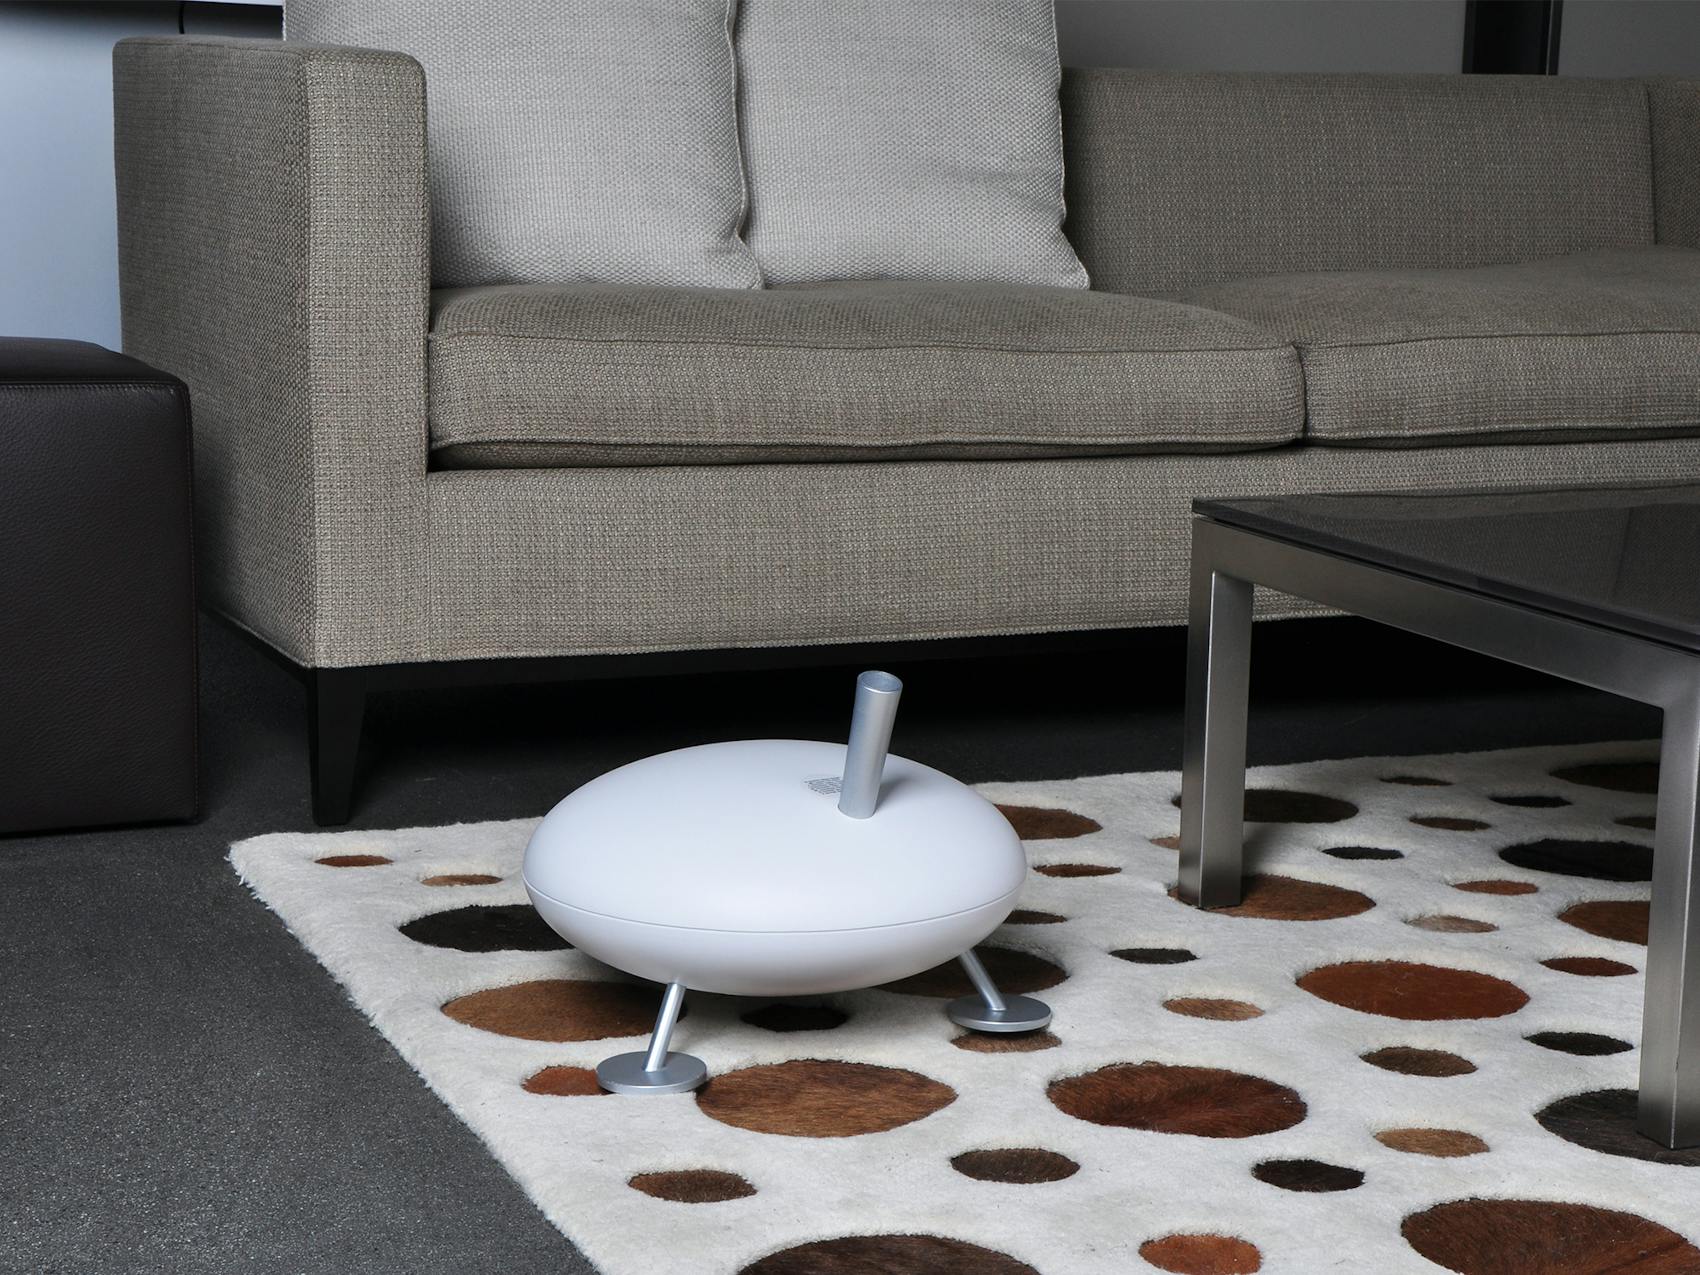 Fred humidifier by Stadler Form in white in a living room